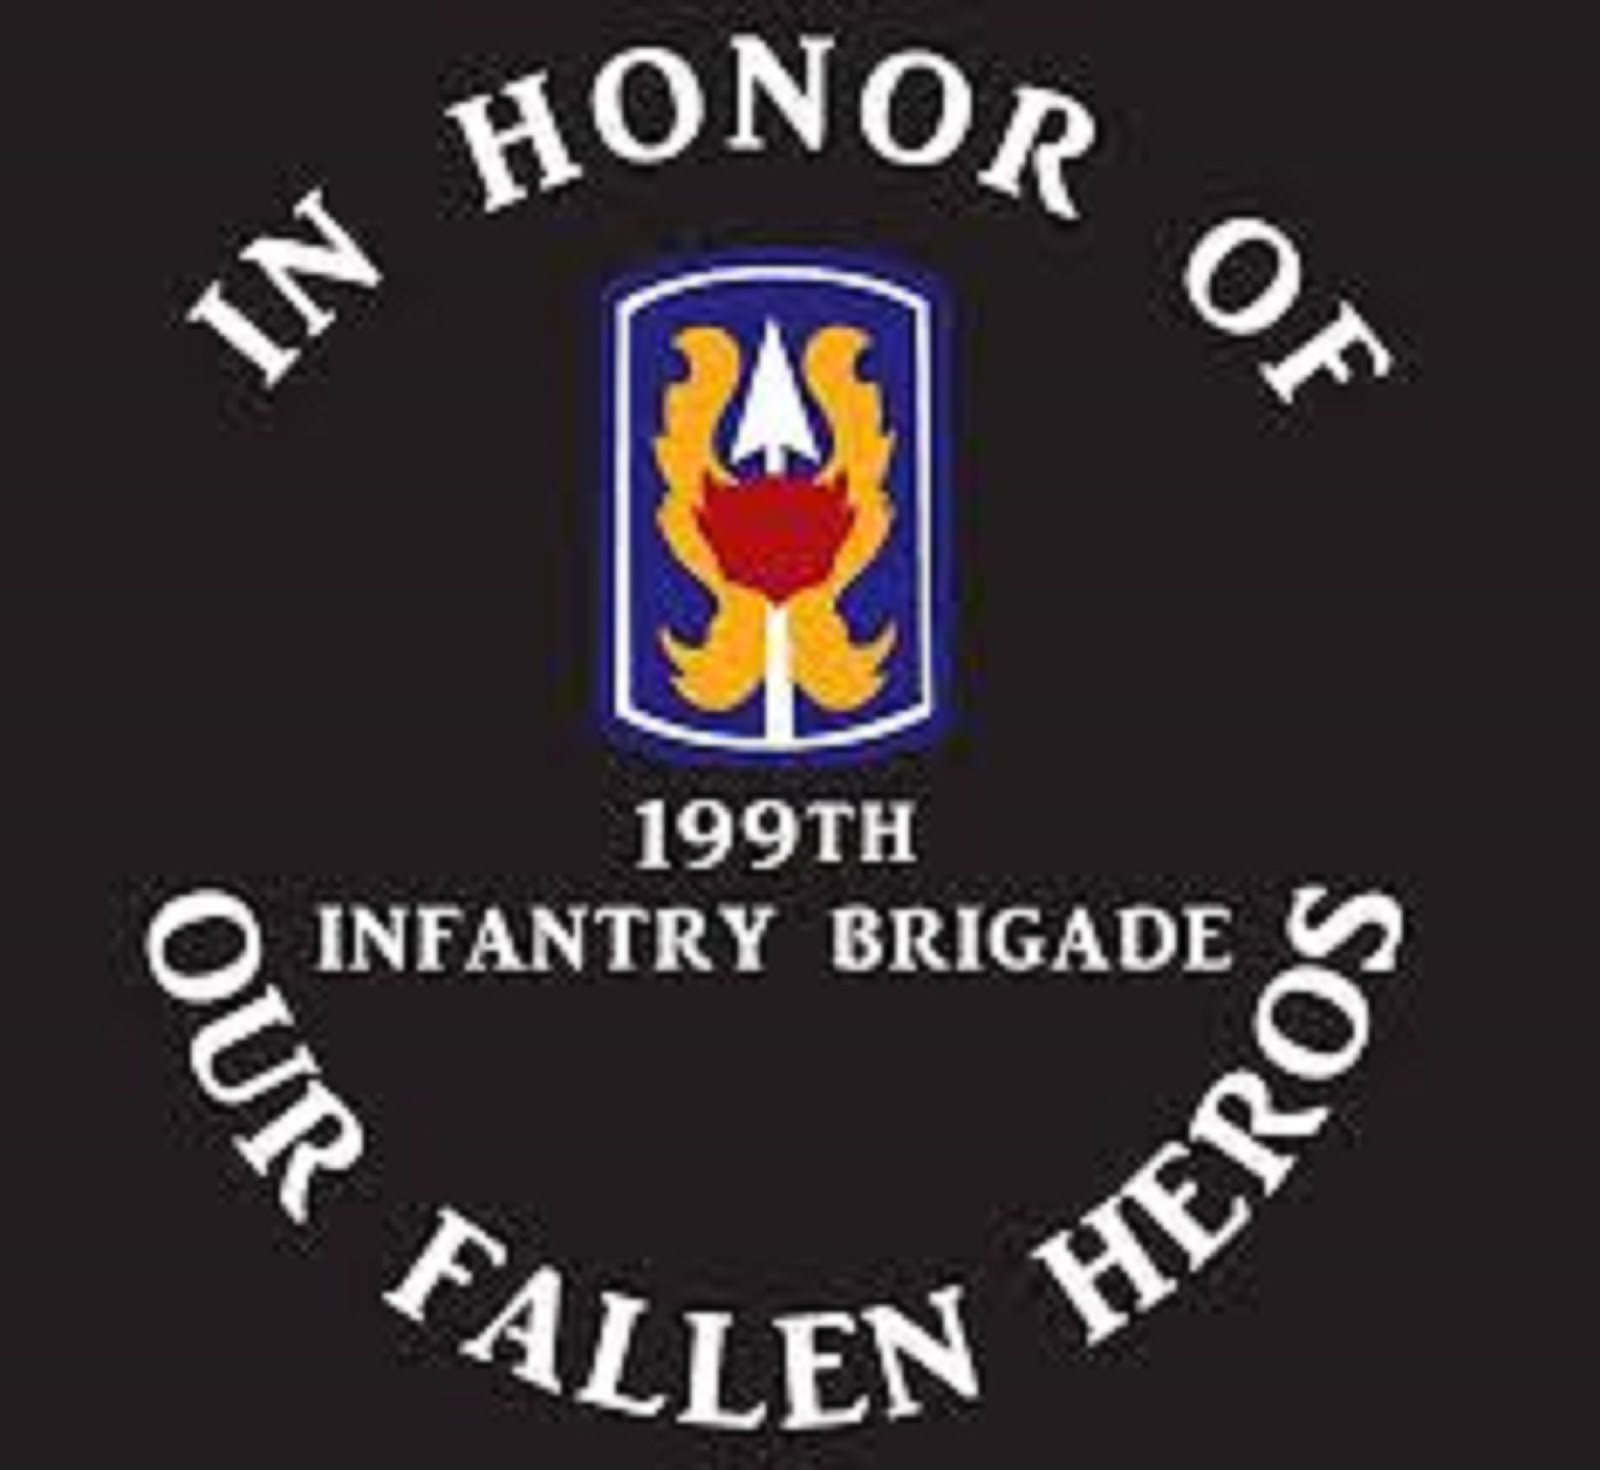 IN HONOR OF 199th INFANTRY BRIGADE OUR FALLEN  HEROES